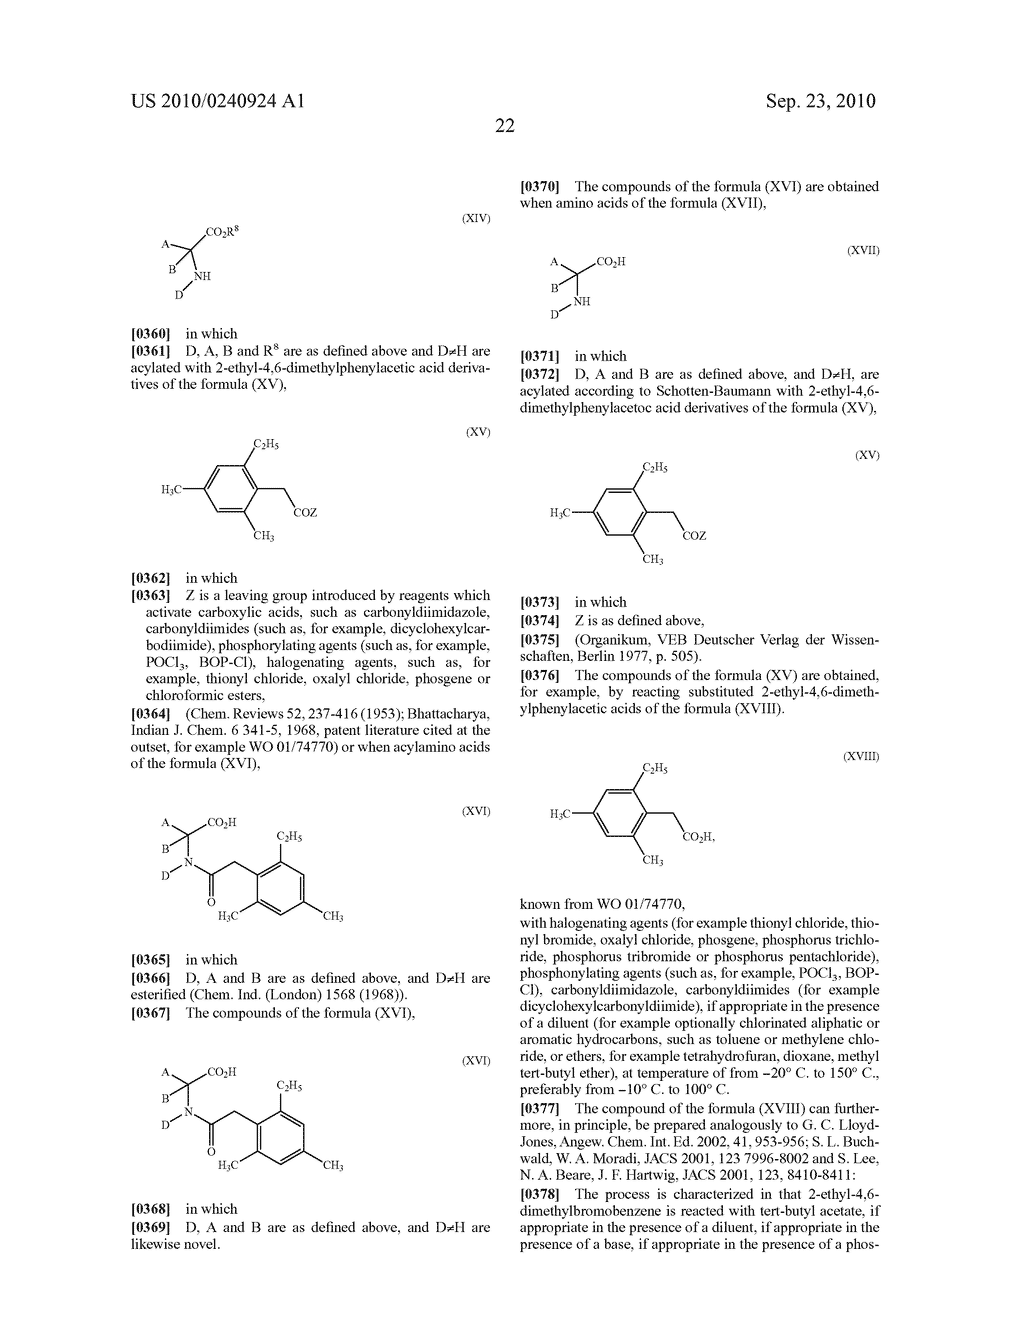 2-ETHYL-4,6-DIMETHYL-PHENYL-SUBSTITUTED TETRAMIC ACID DERIVATIVES AS PEST CONTROL AGENTS AND/OR HERBICIDES - diagram, schematic, and image 23